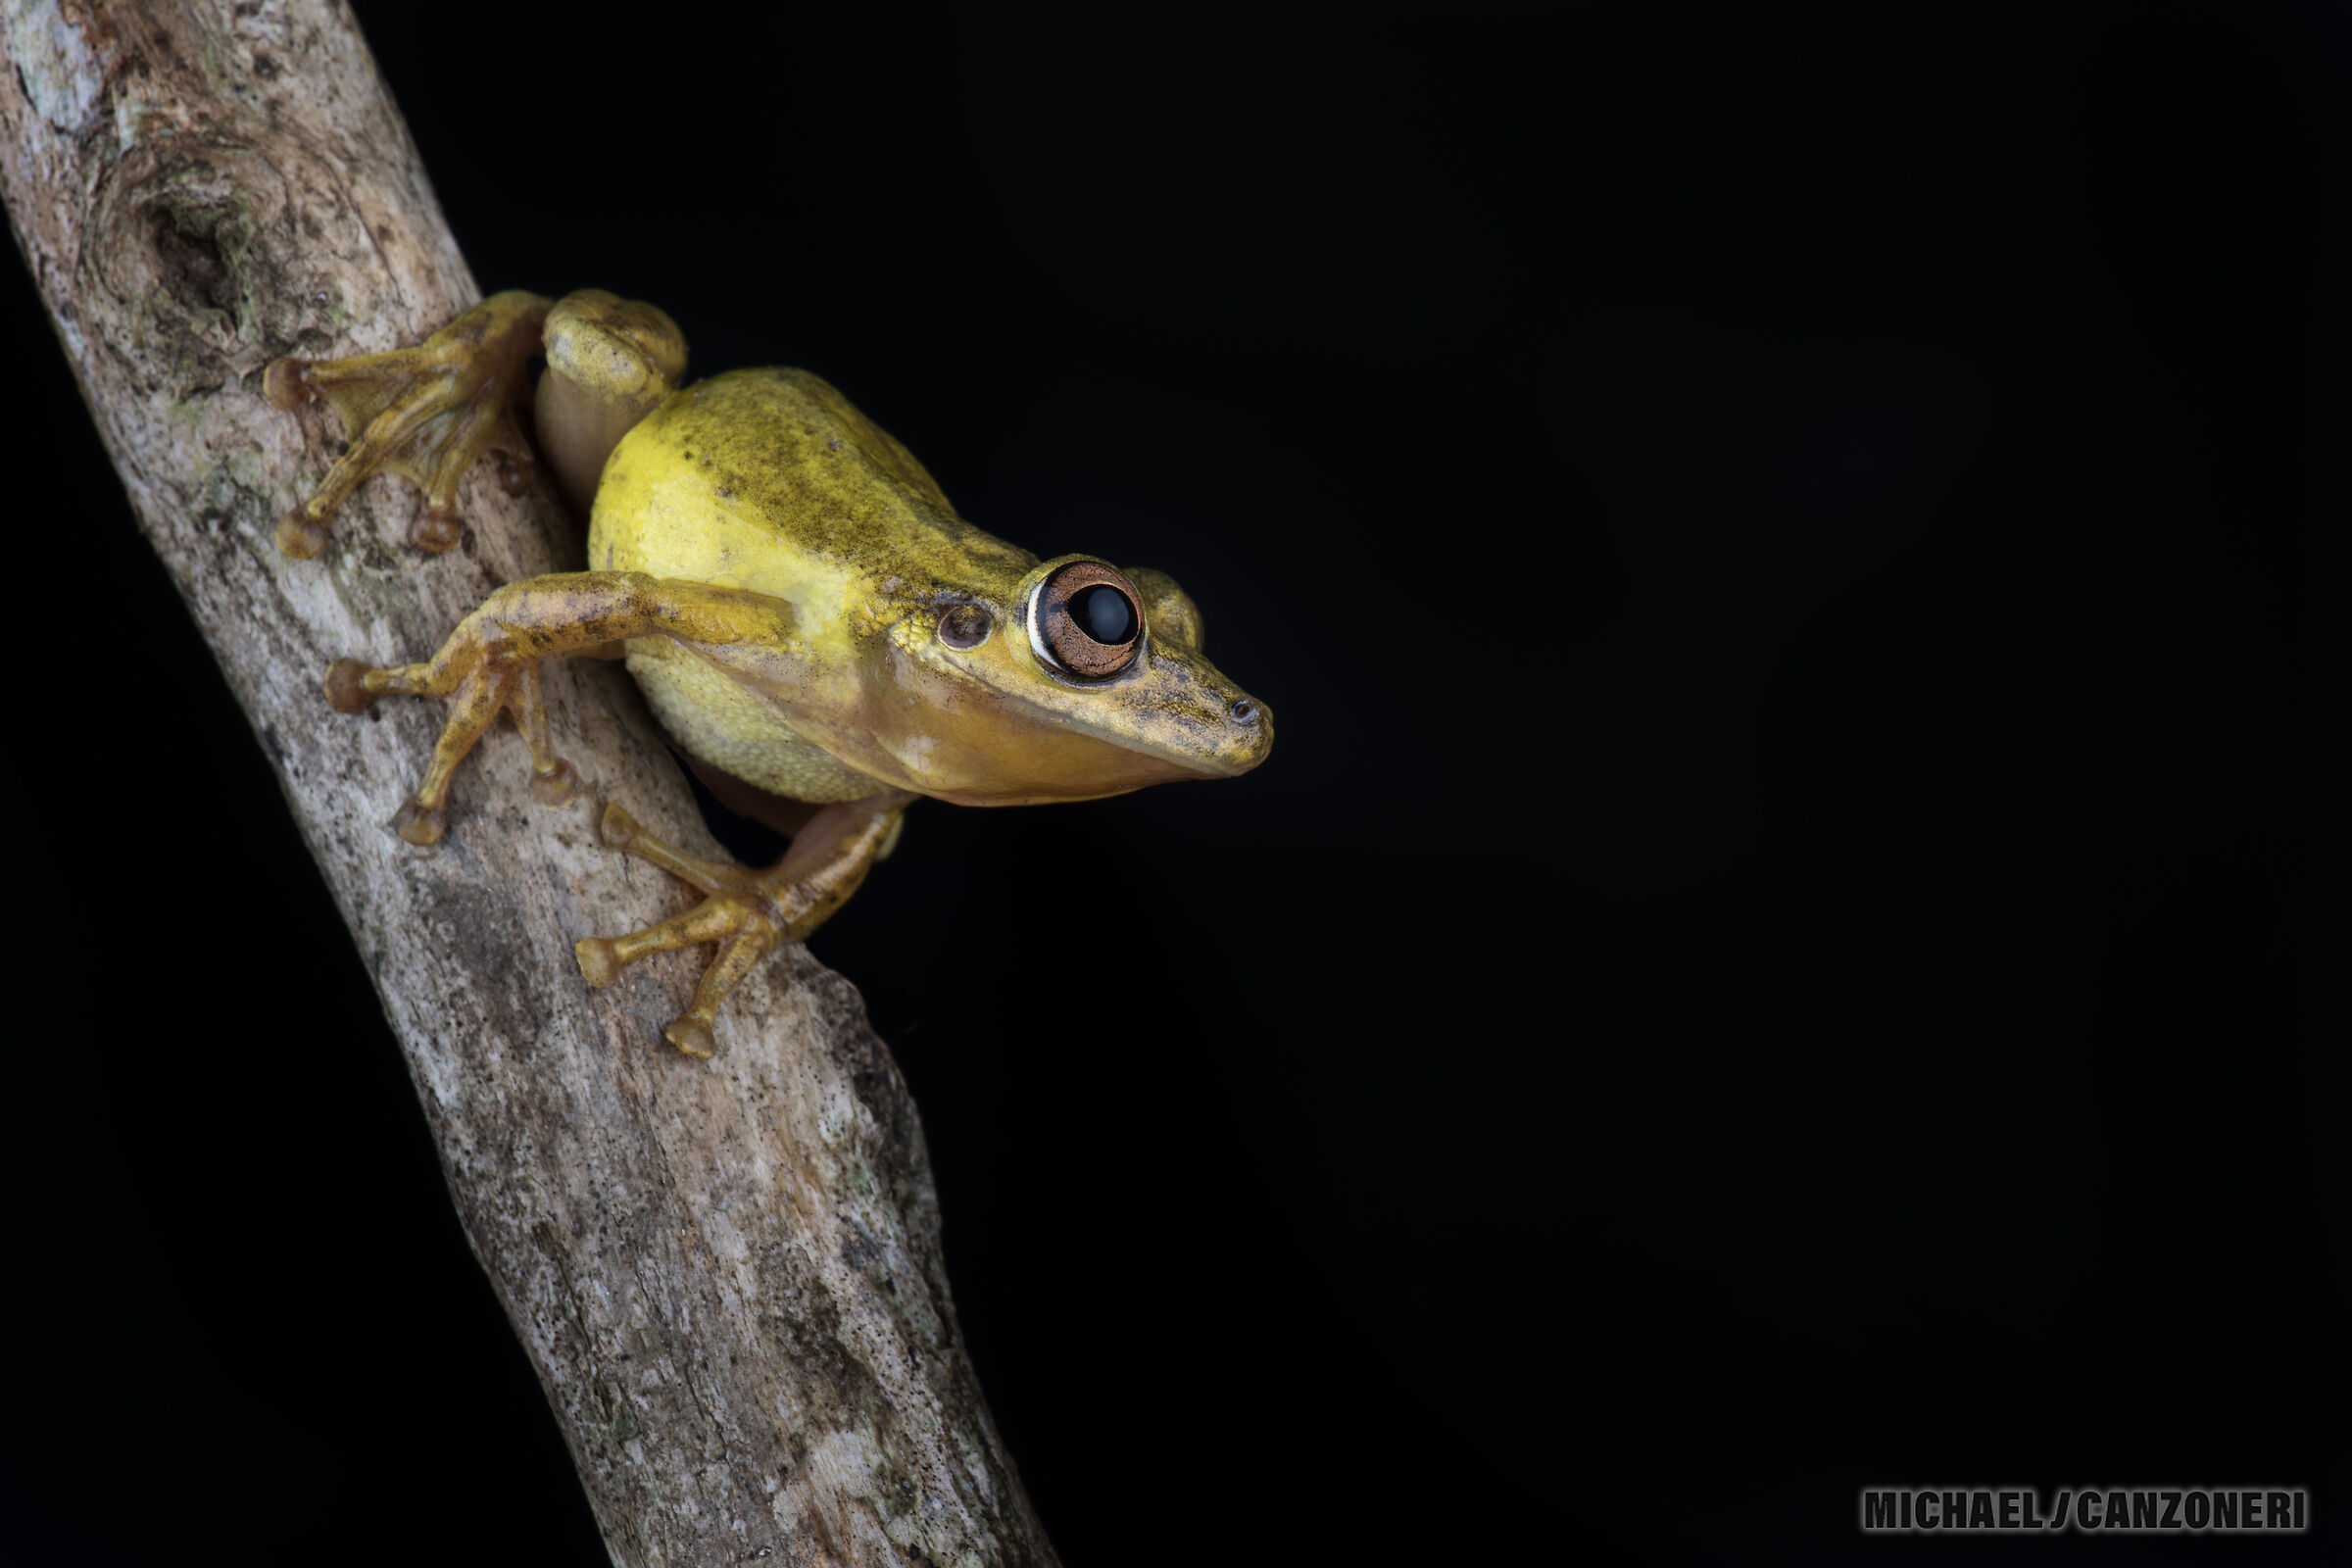 Olive snouted tree frog (Scinax elaeochroa)...